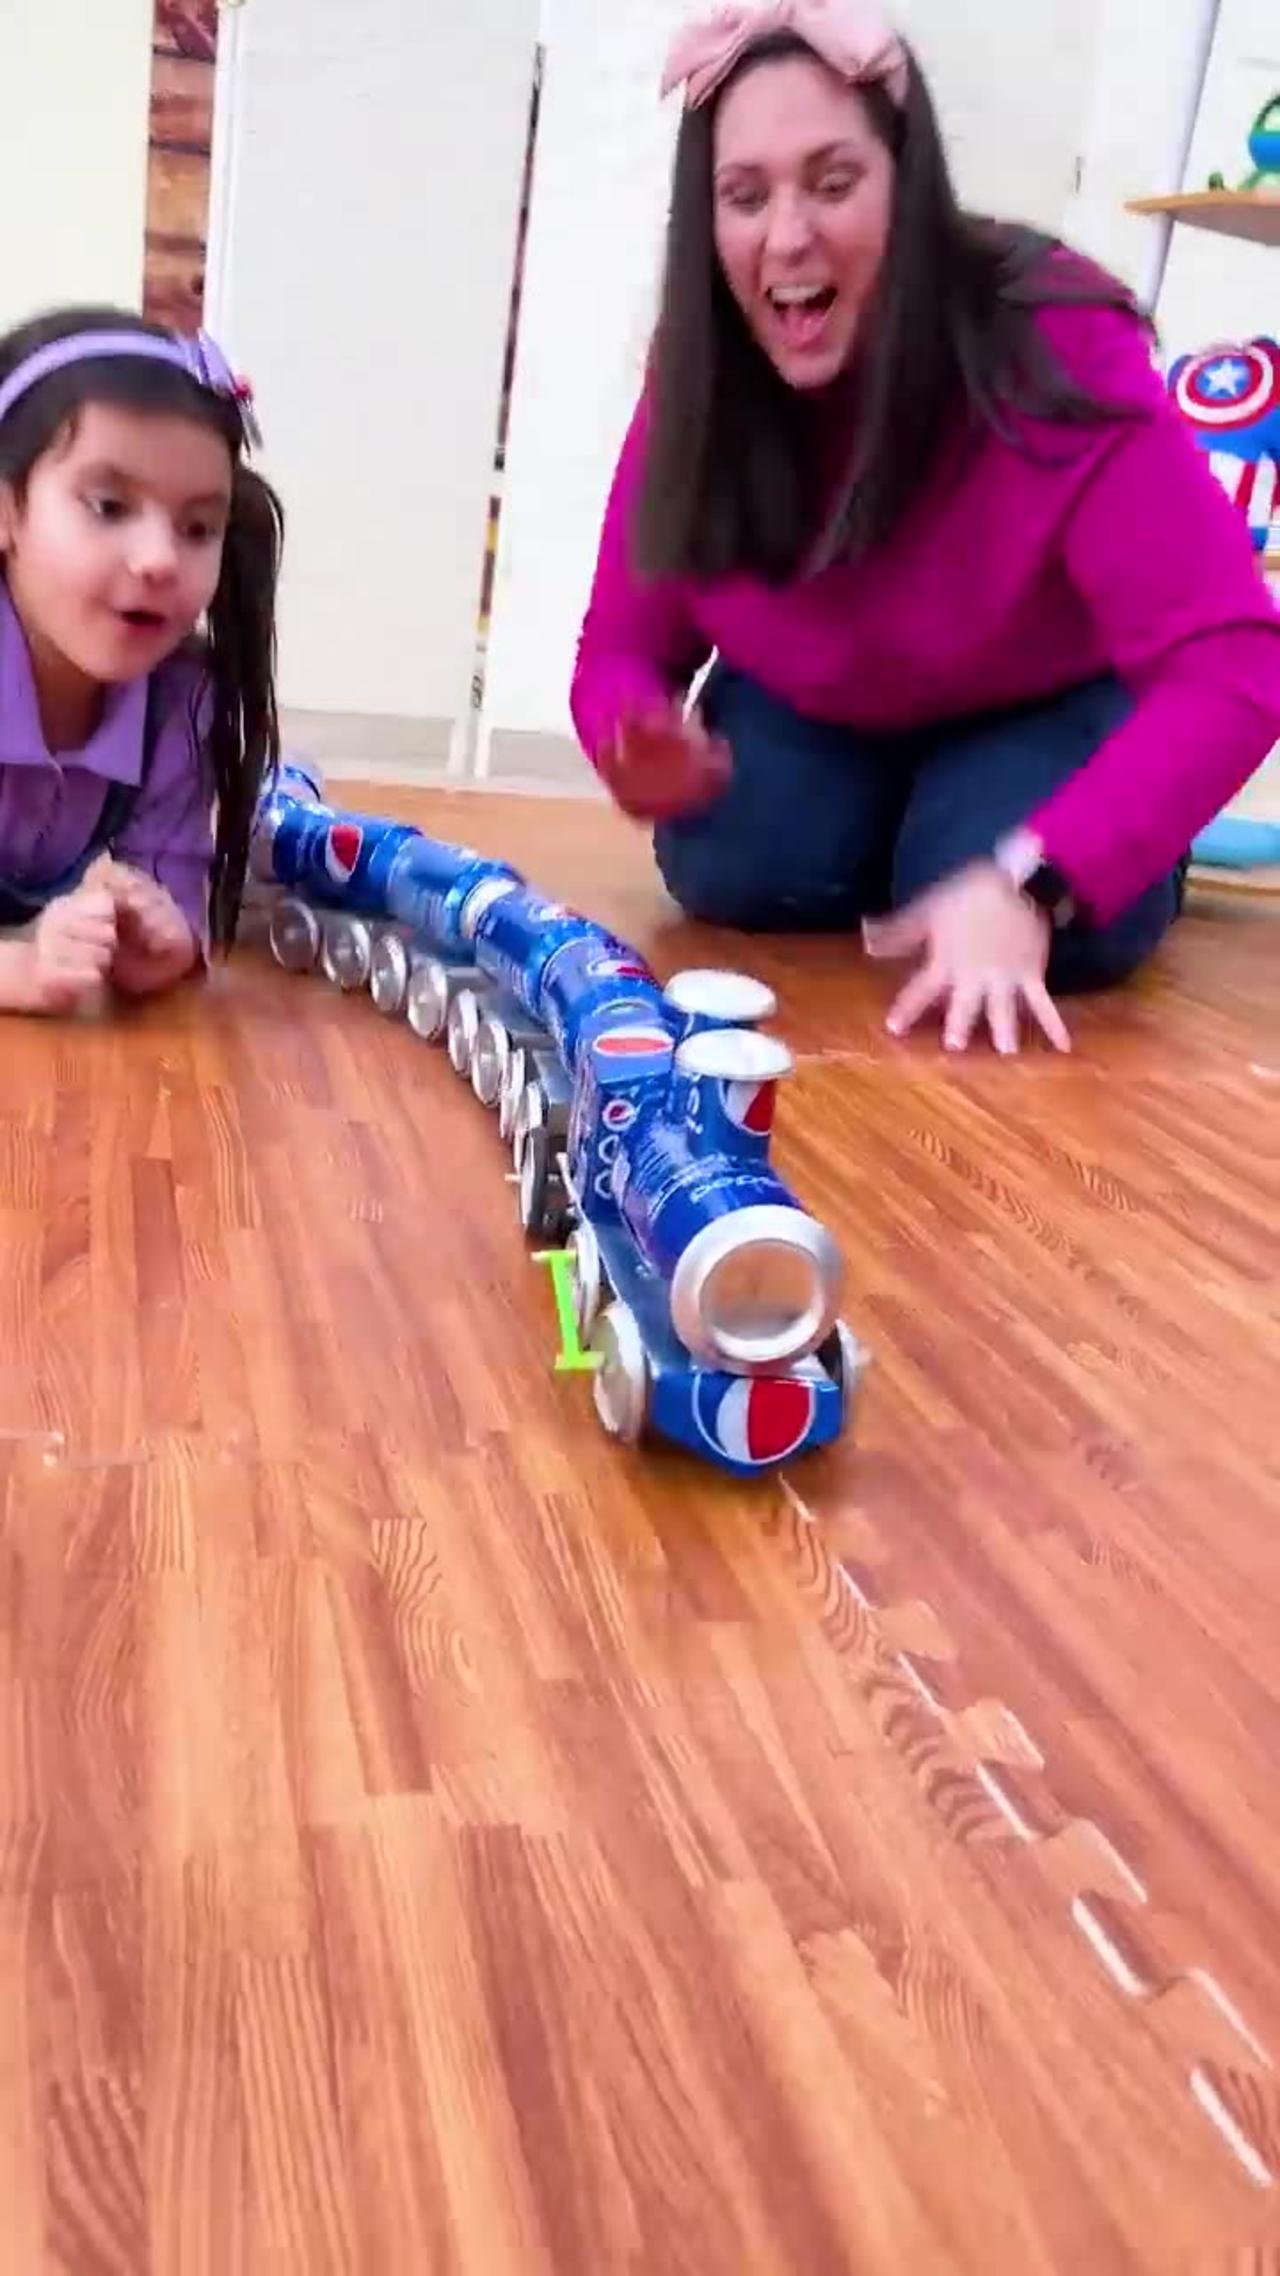 Train Toy Made From Pepsi Cans, #Eco Adventure, #Recyclying Fun